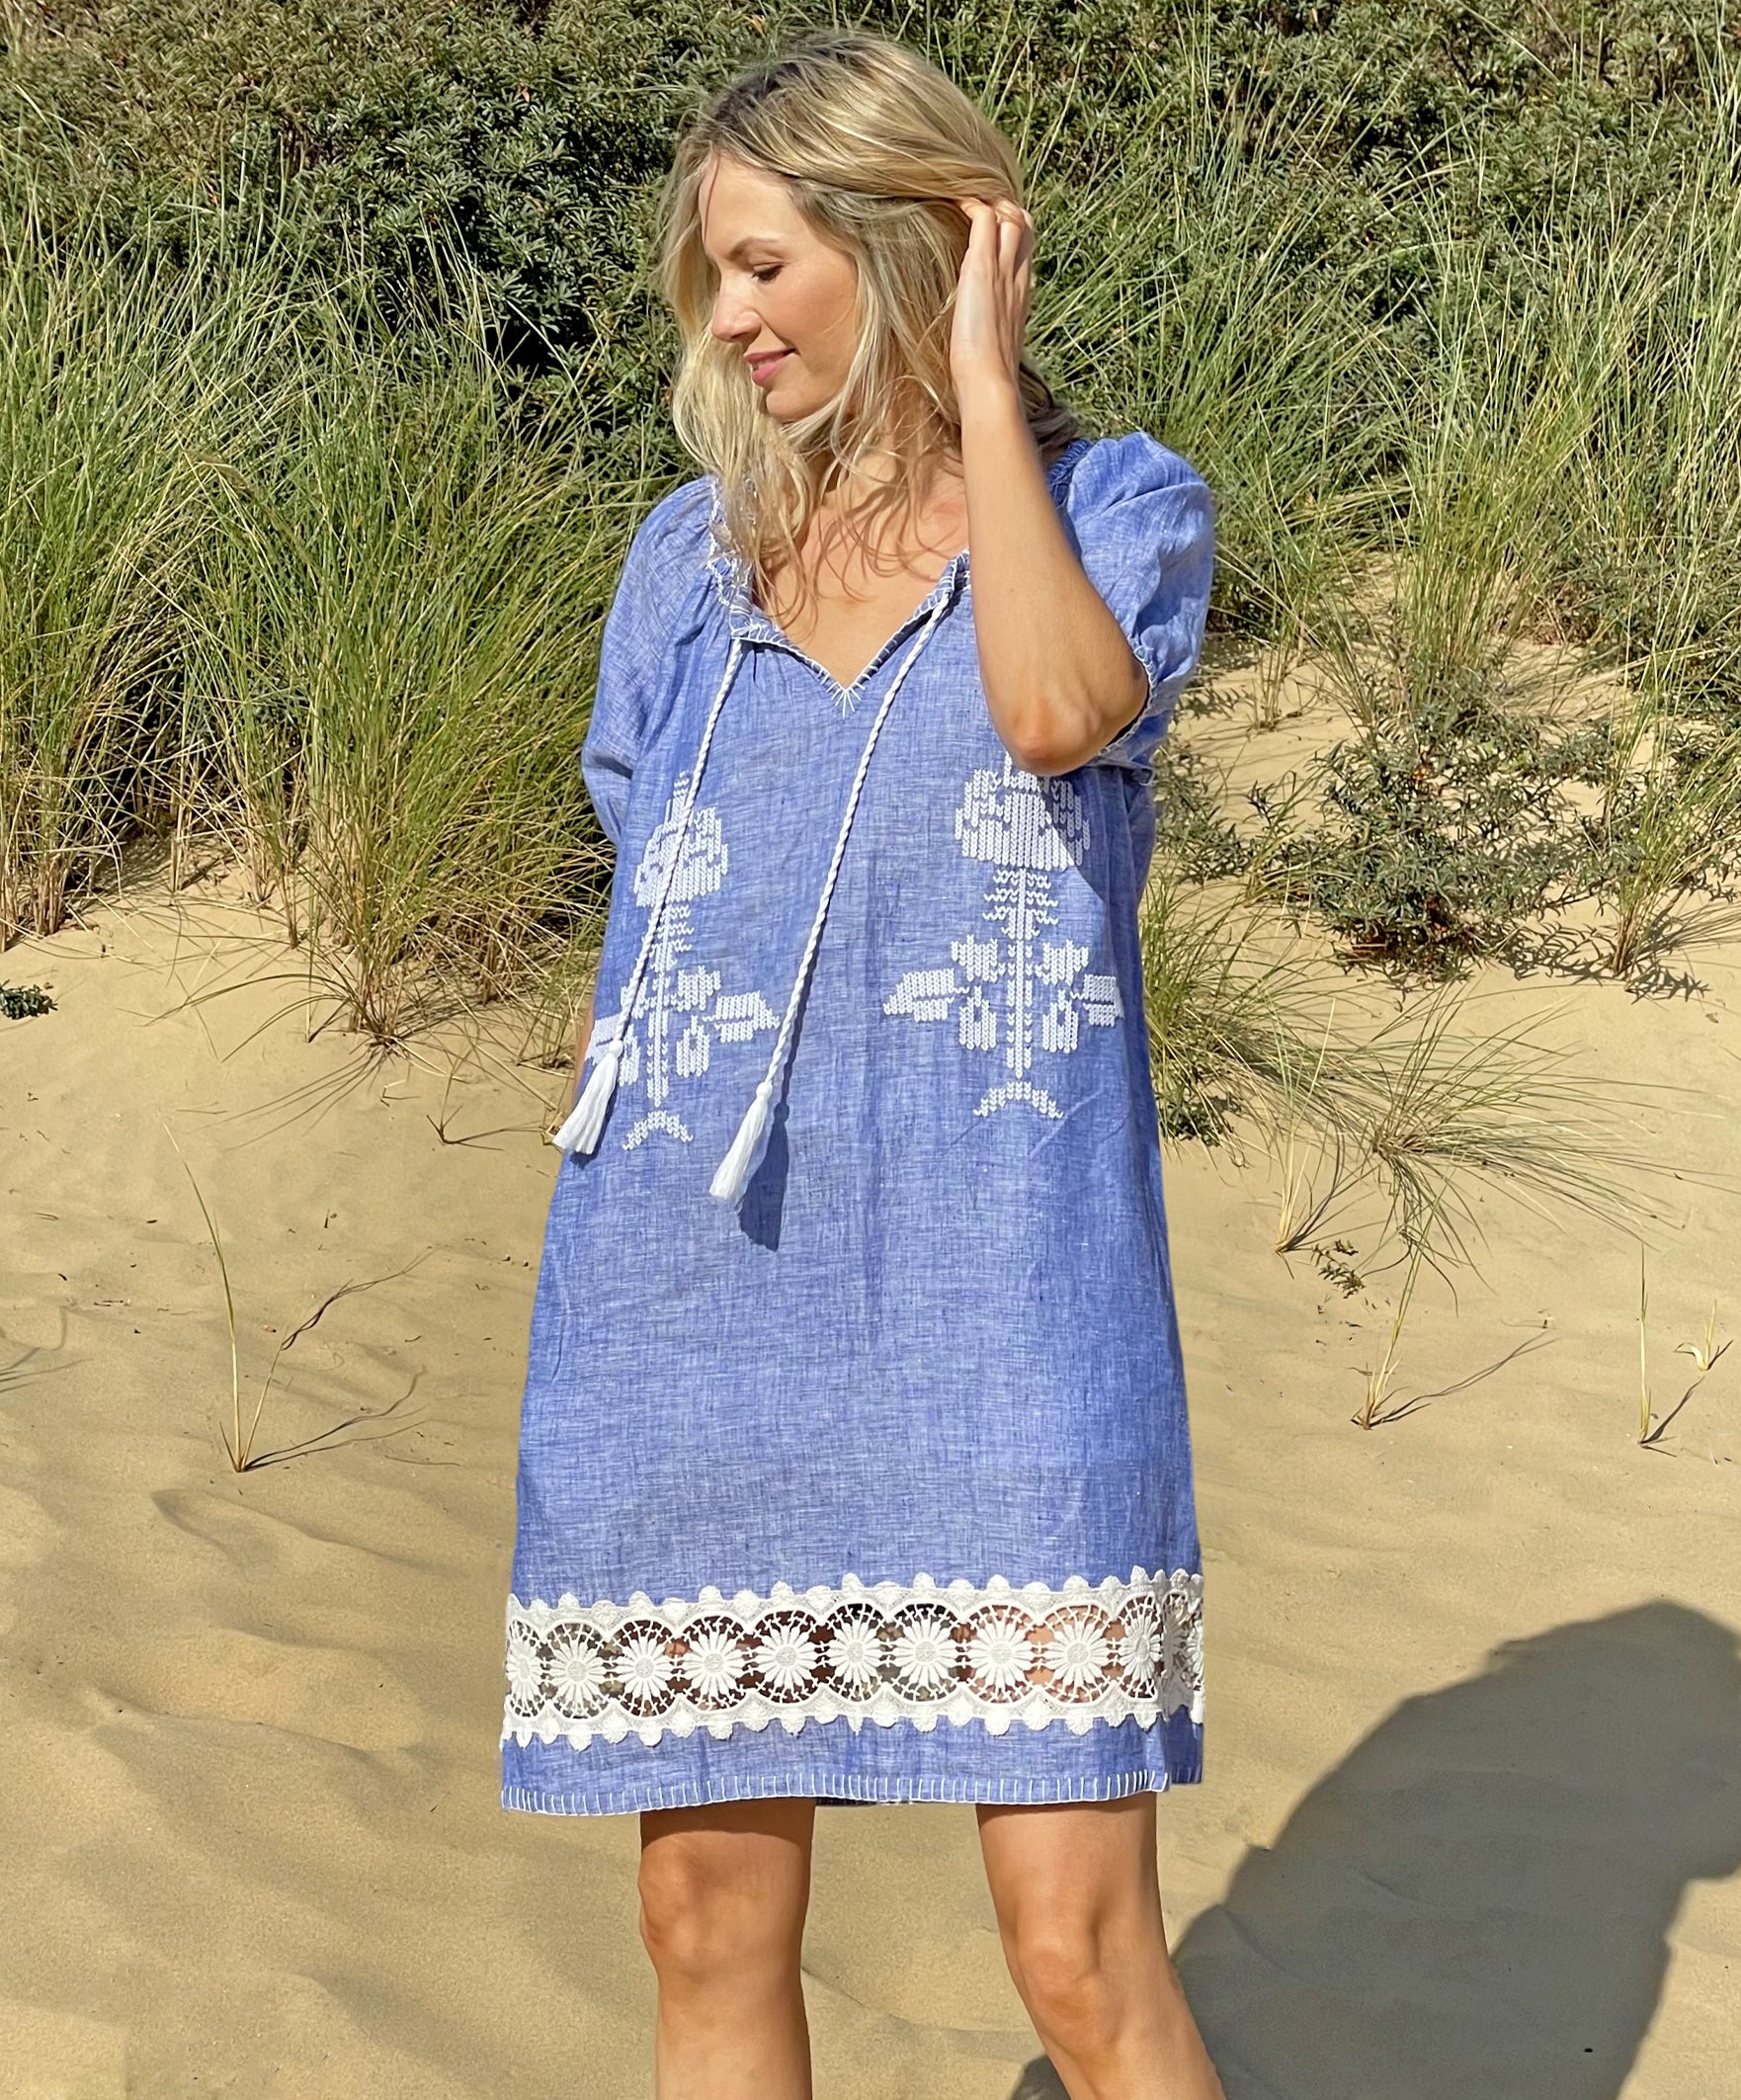 A model on a beach wearing the Rose and Rose Siracusa embroidered blue linen dress.